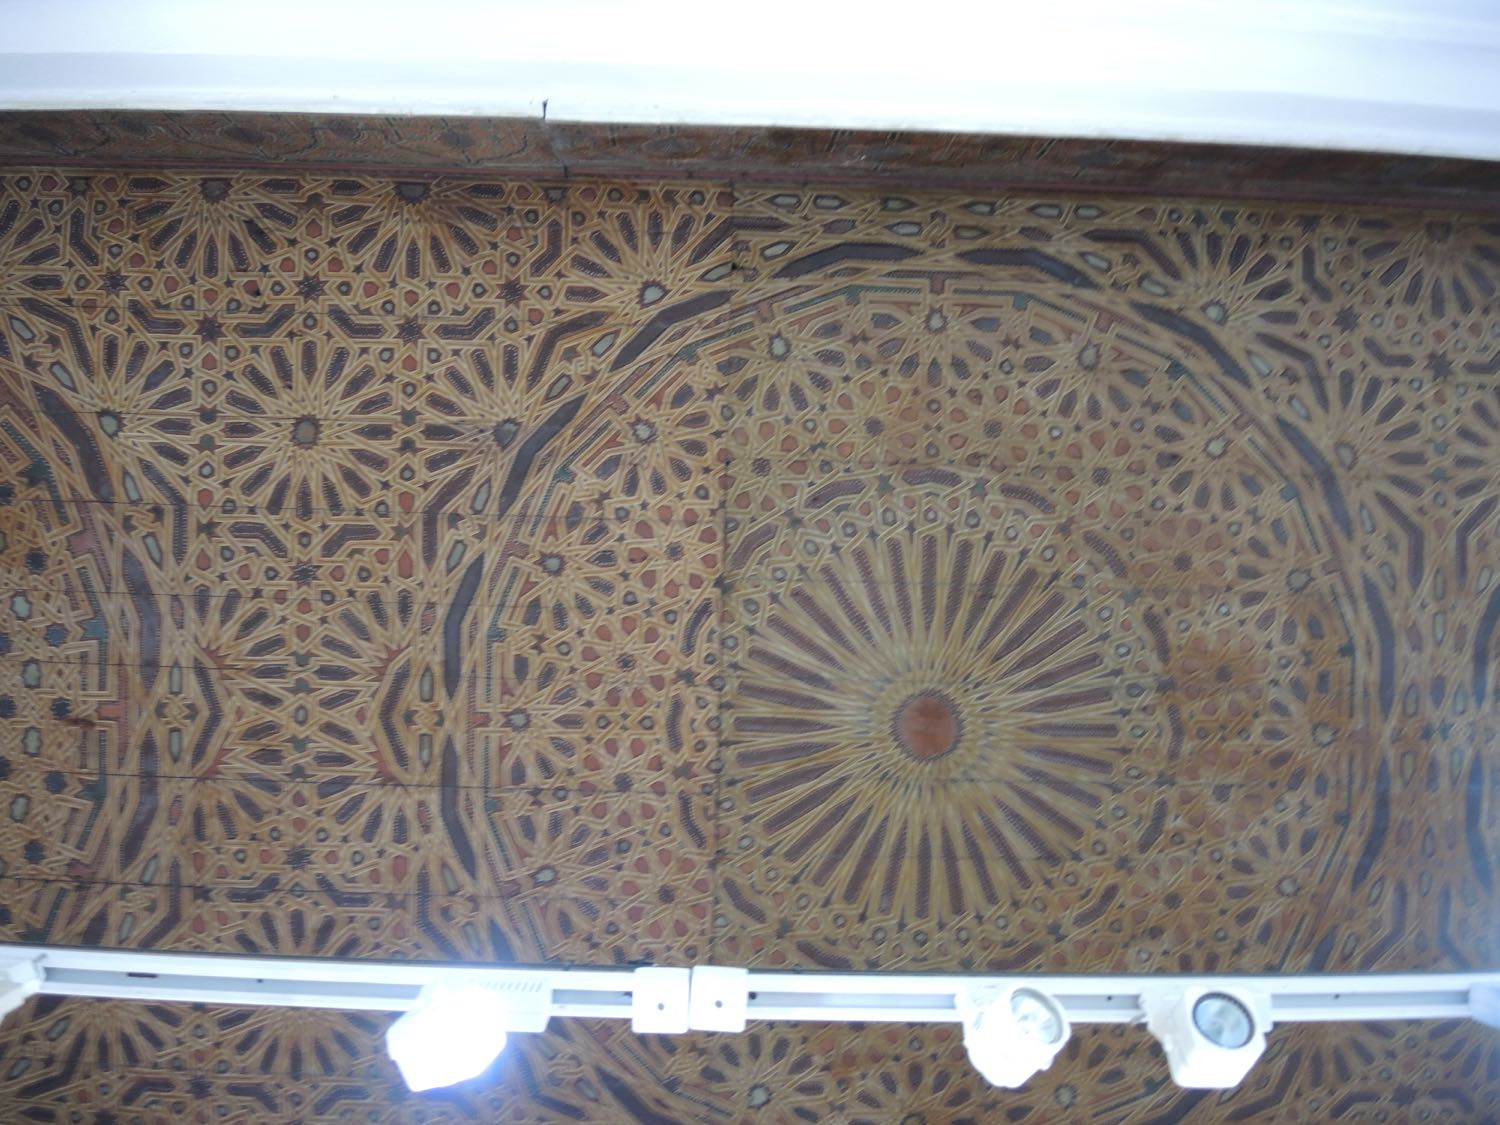 Interior view of the wood ceiling